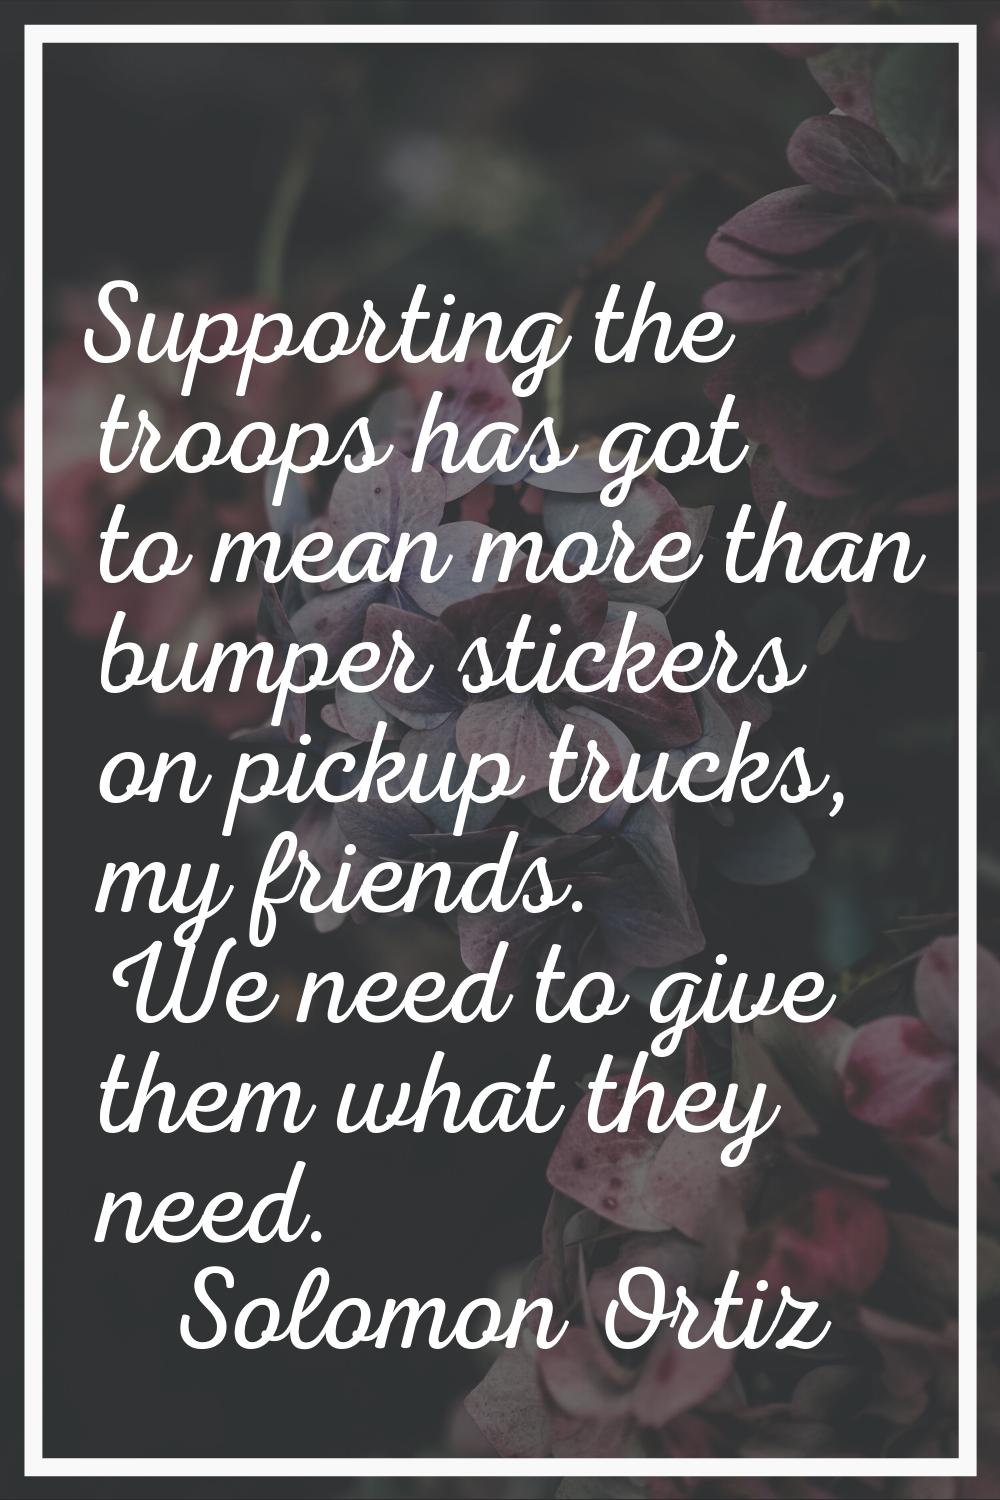 Supporting the troops has got to mean more than bumper stickers on pickup trucks, my friends. We ne